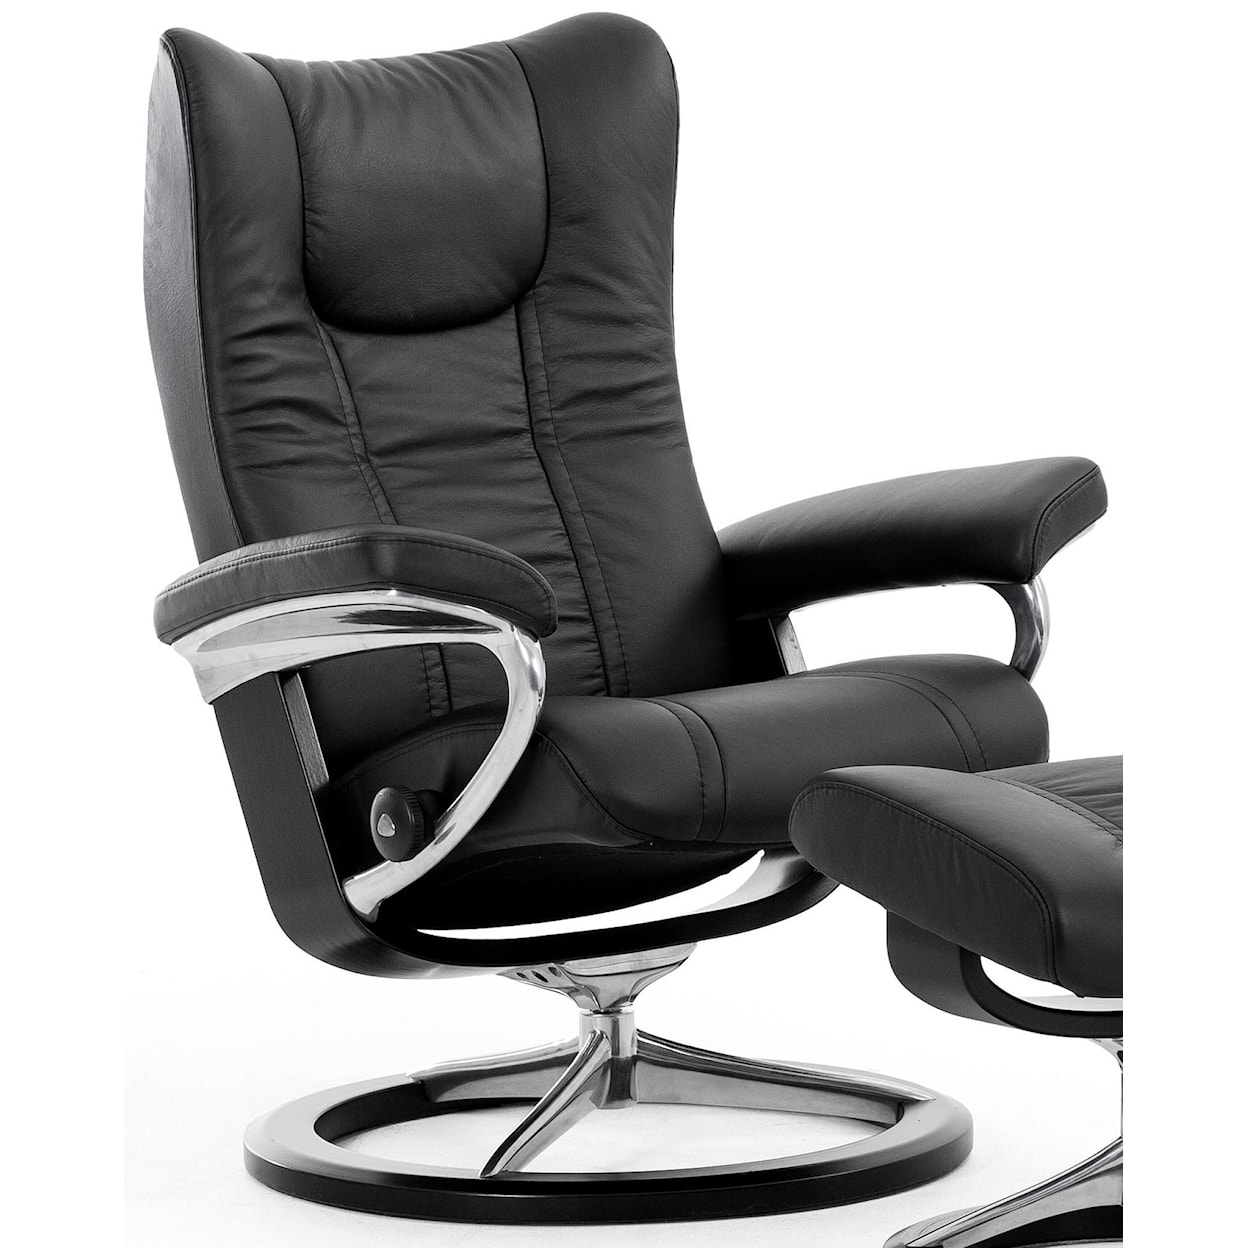 Stressless by Ekornes Wing Medium Reclining Chair with Signature Base